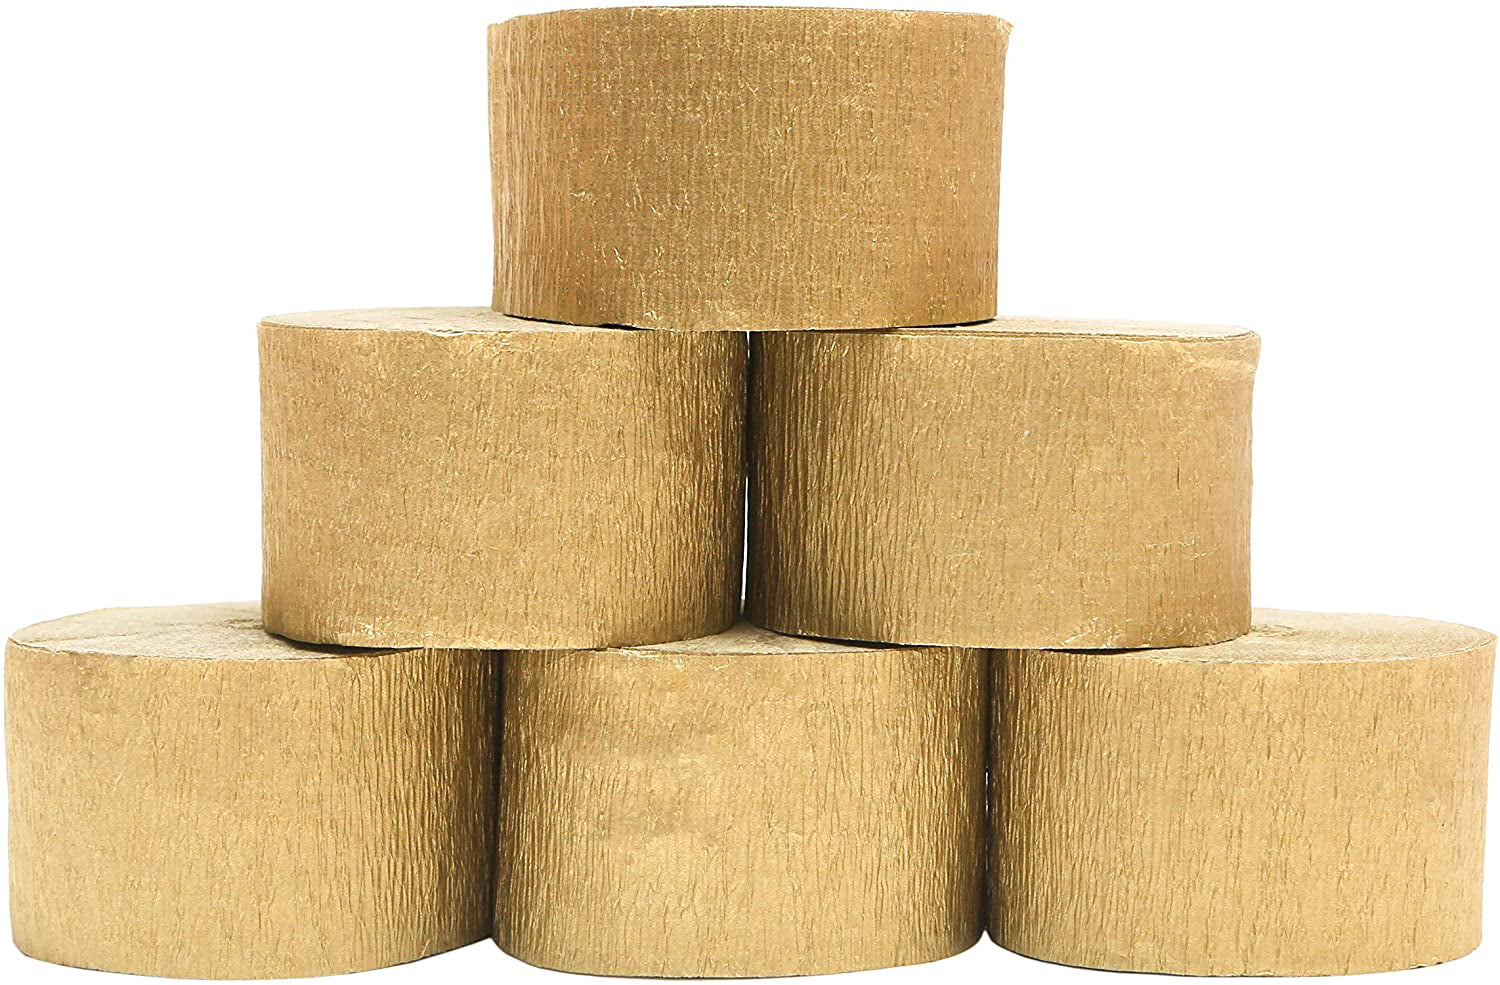 Metallic Brilliant Gold Crepe Paper Roll 20 Inches Wide x 8ft Long 